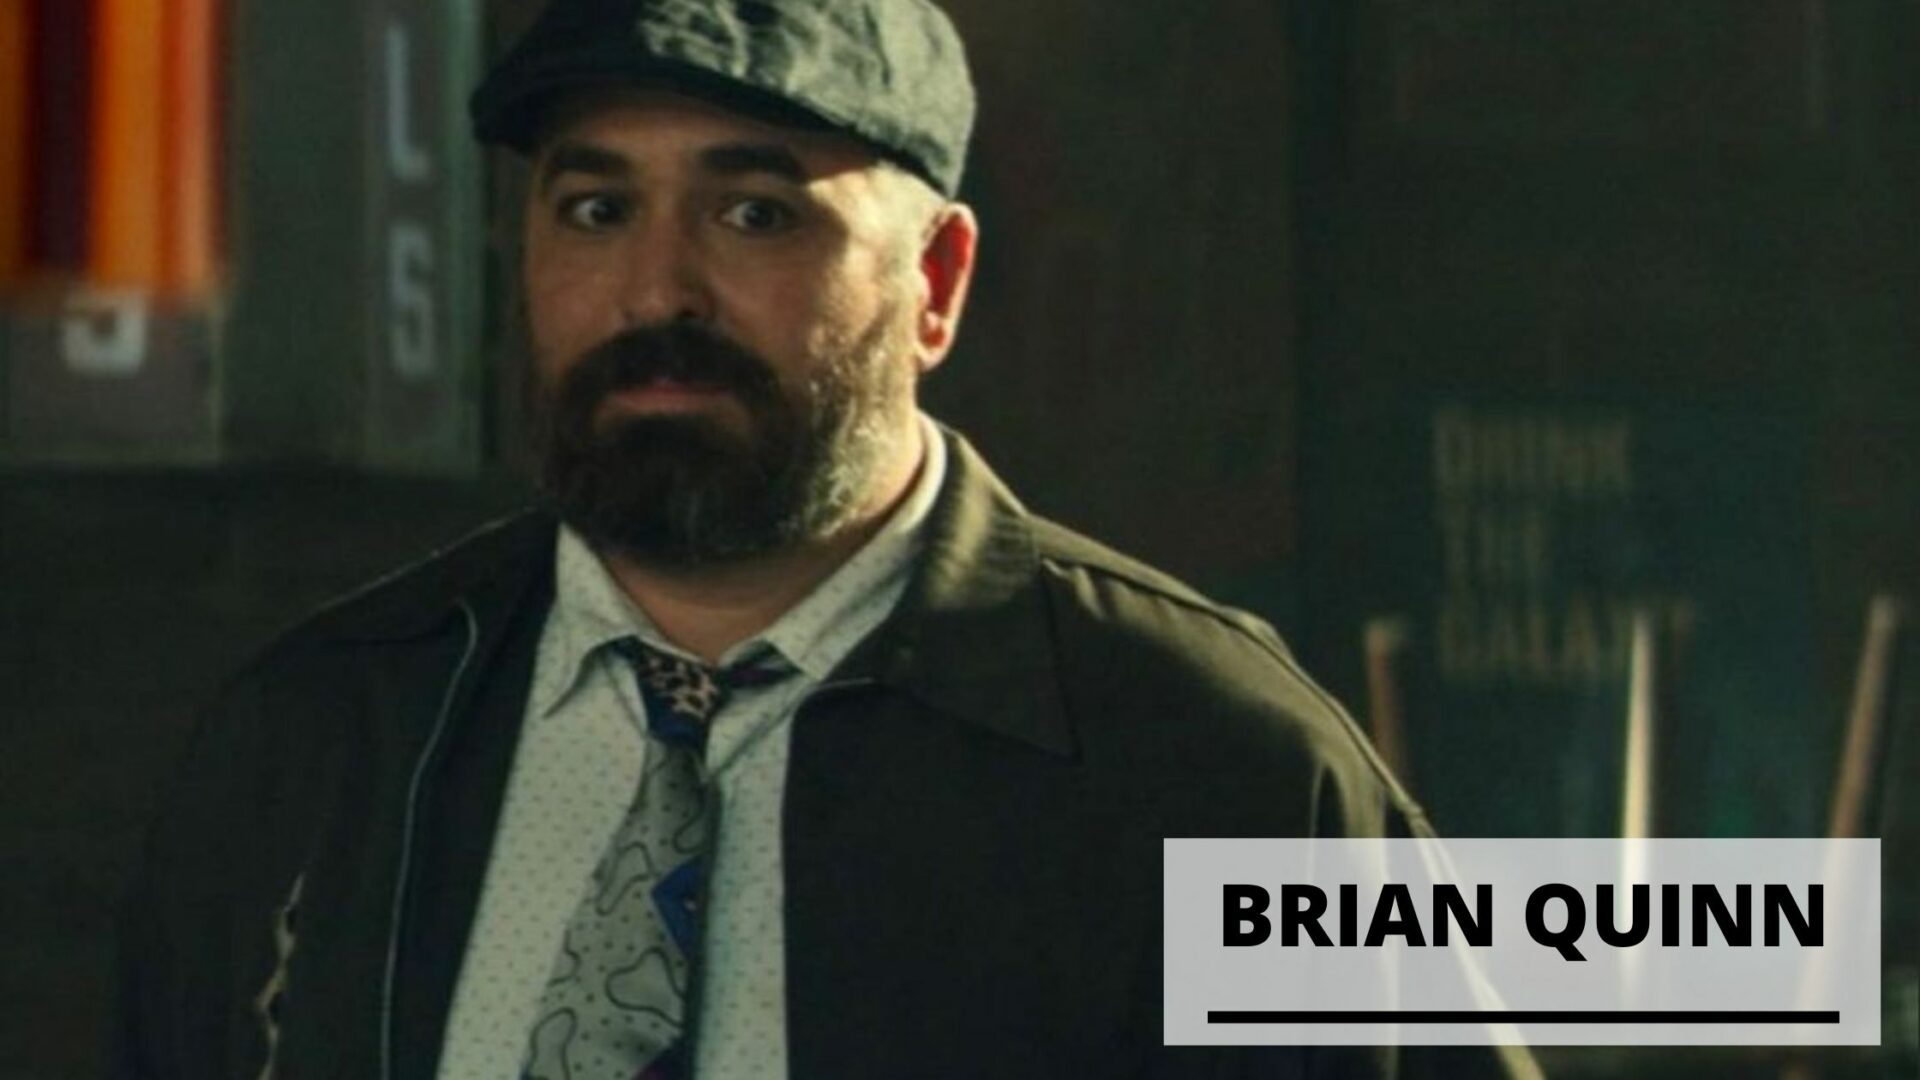 Who is the Wife of Brian Quinn?